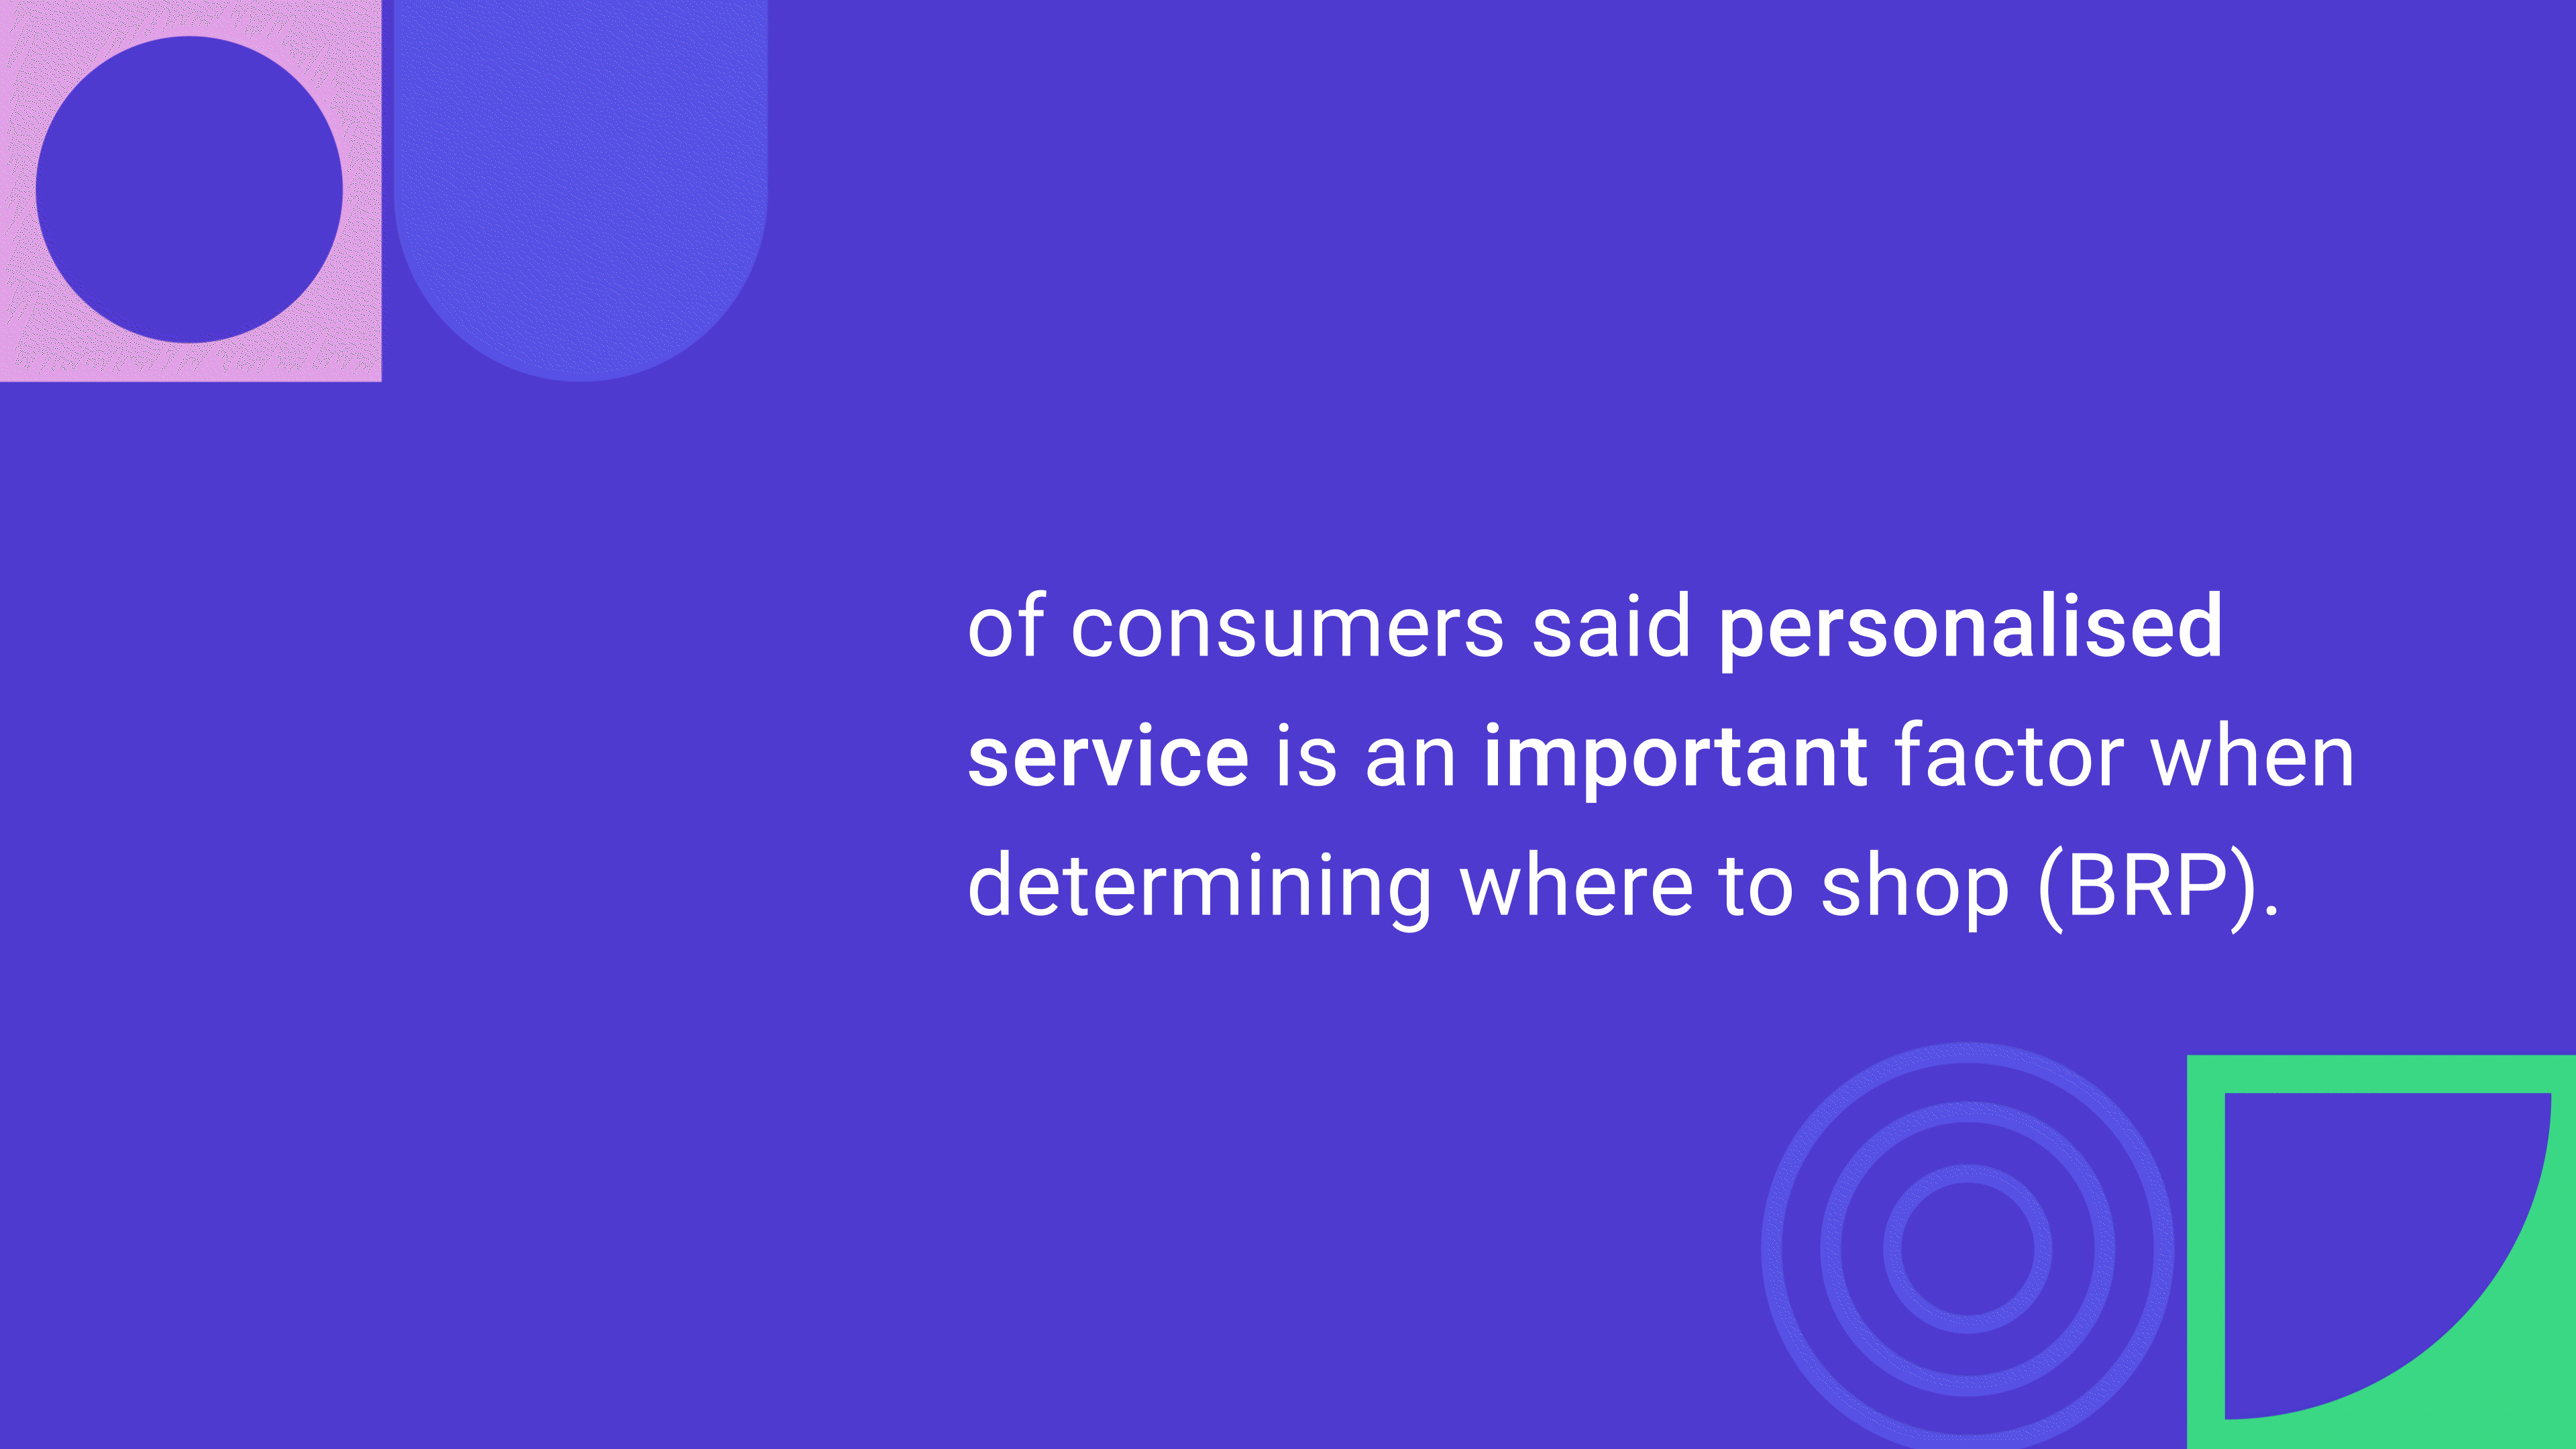 79% of customers value personalised service